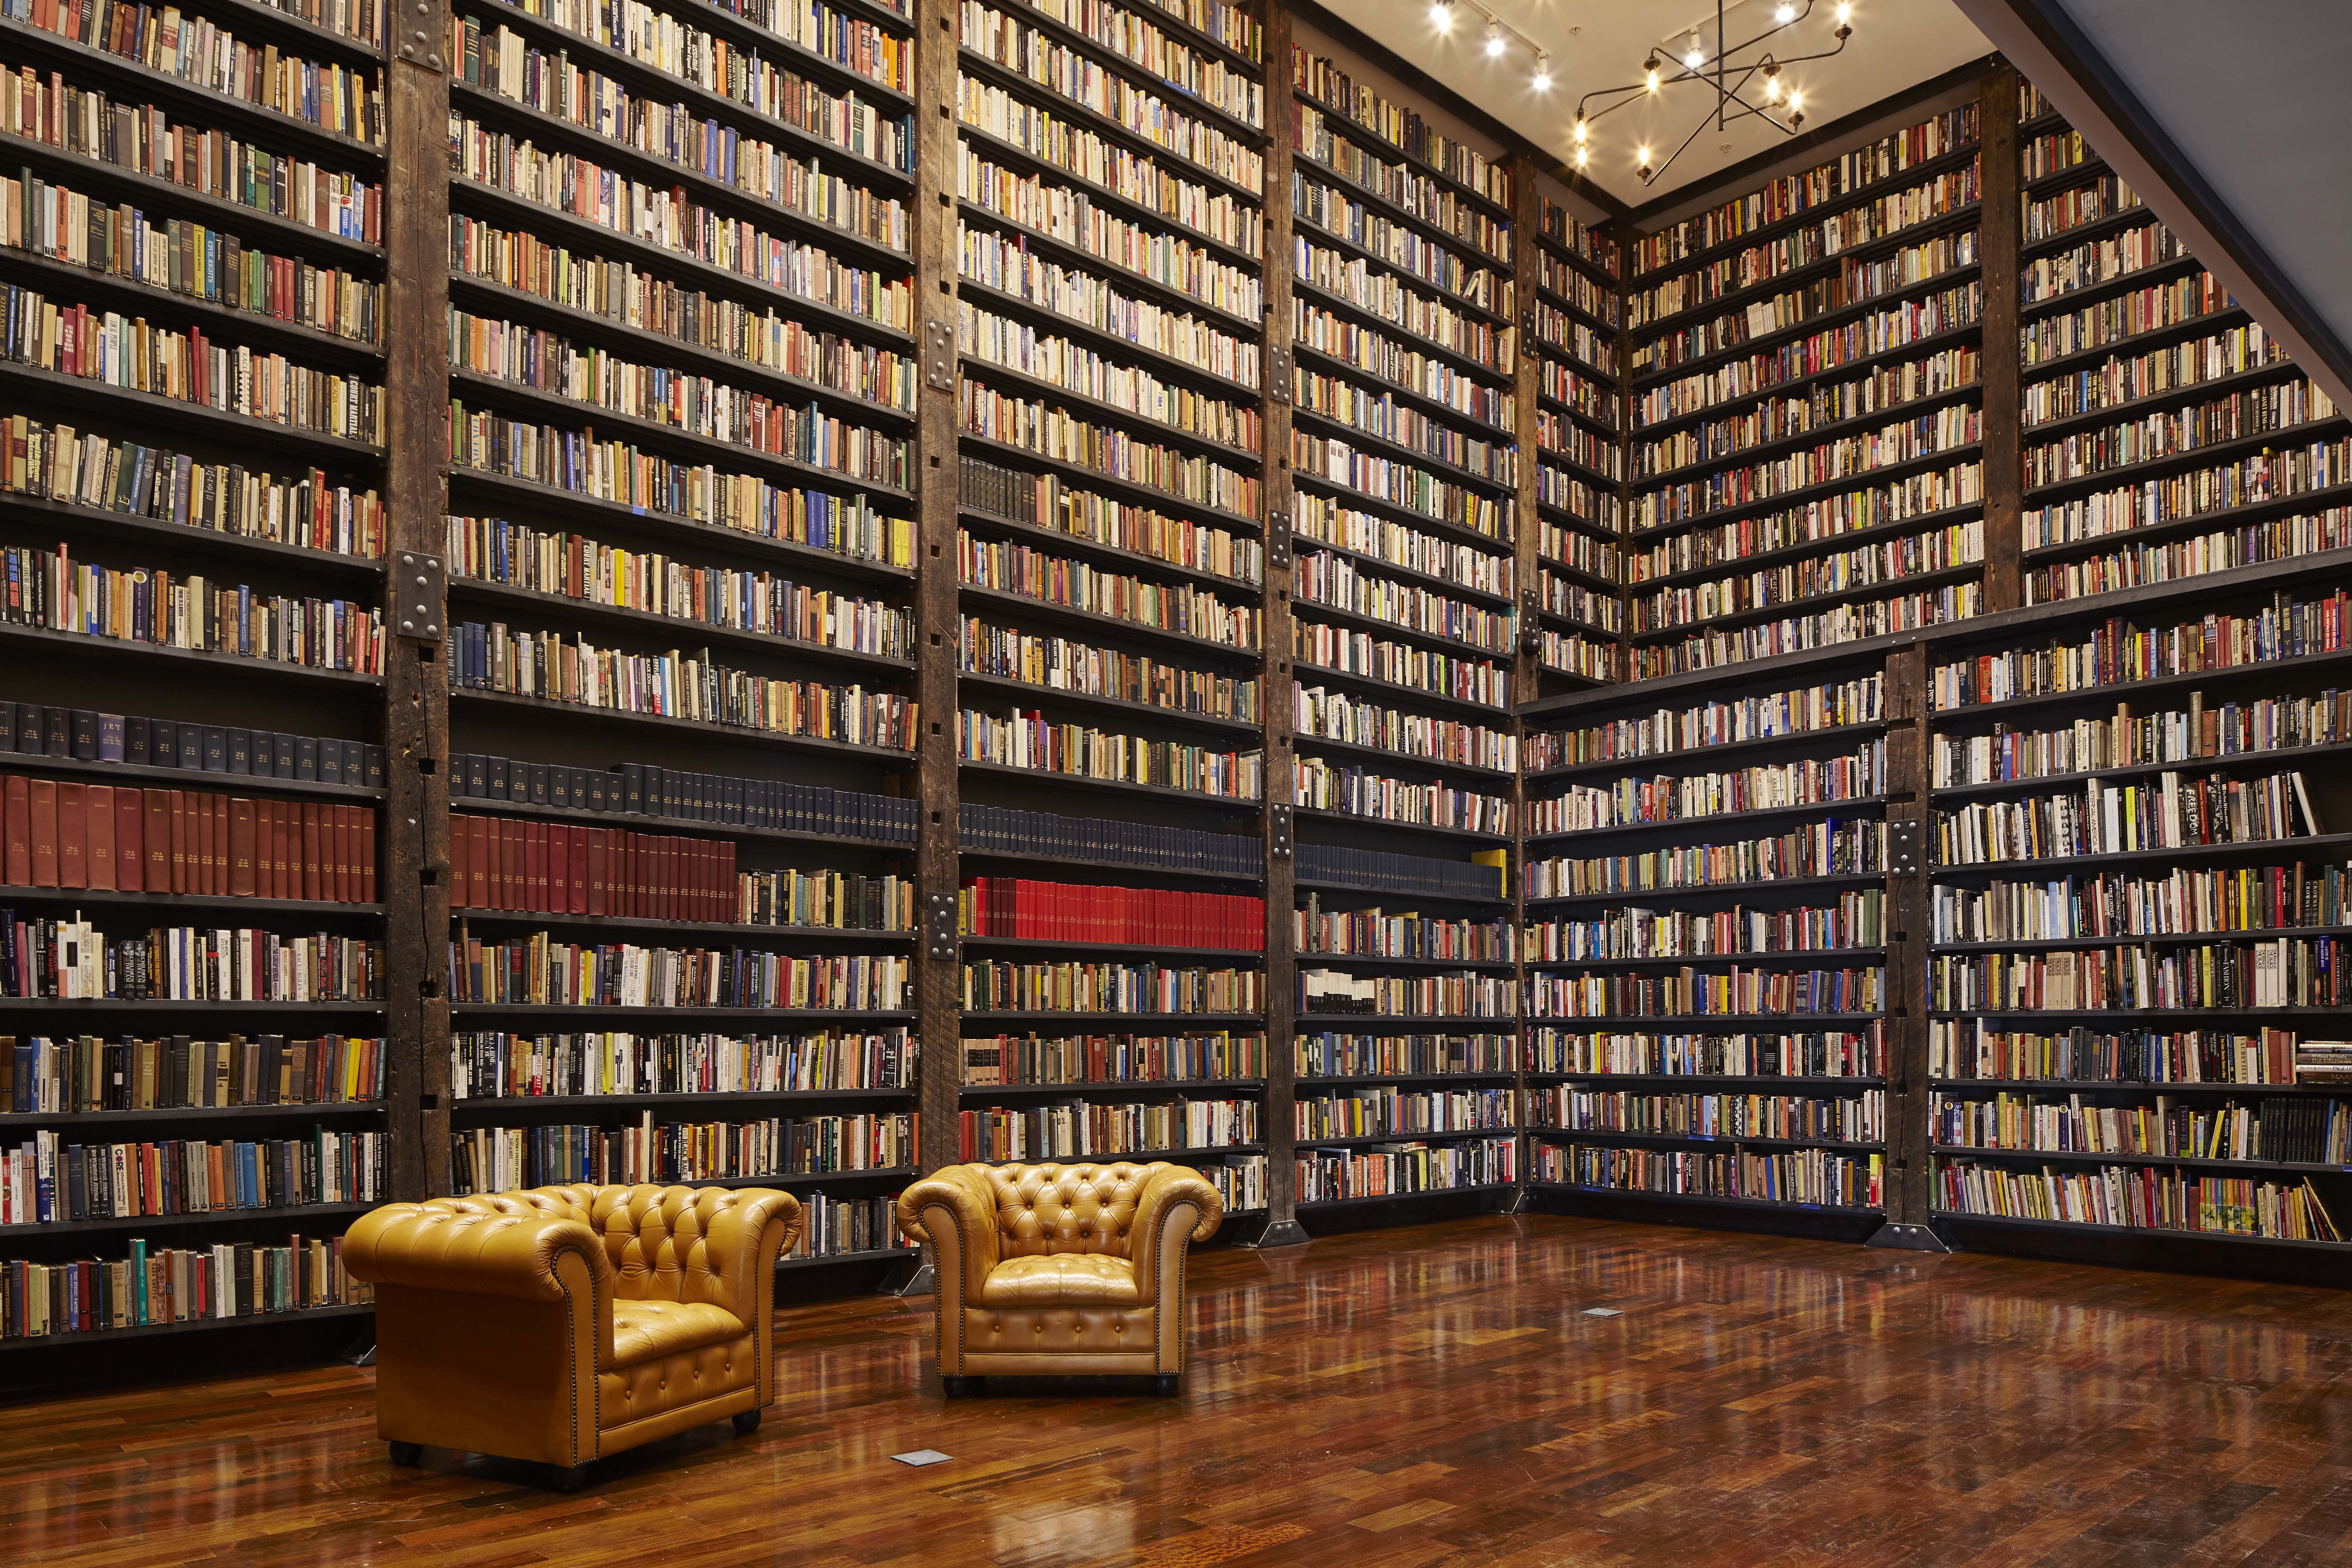 Picture library